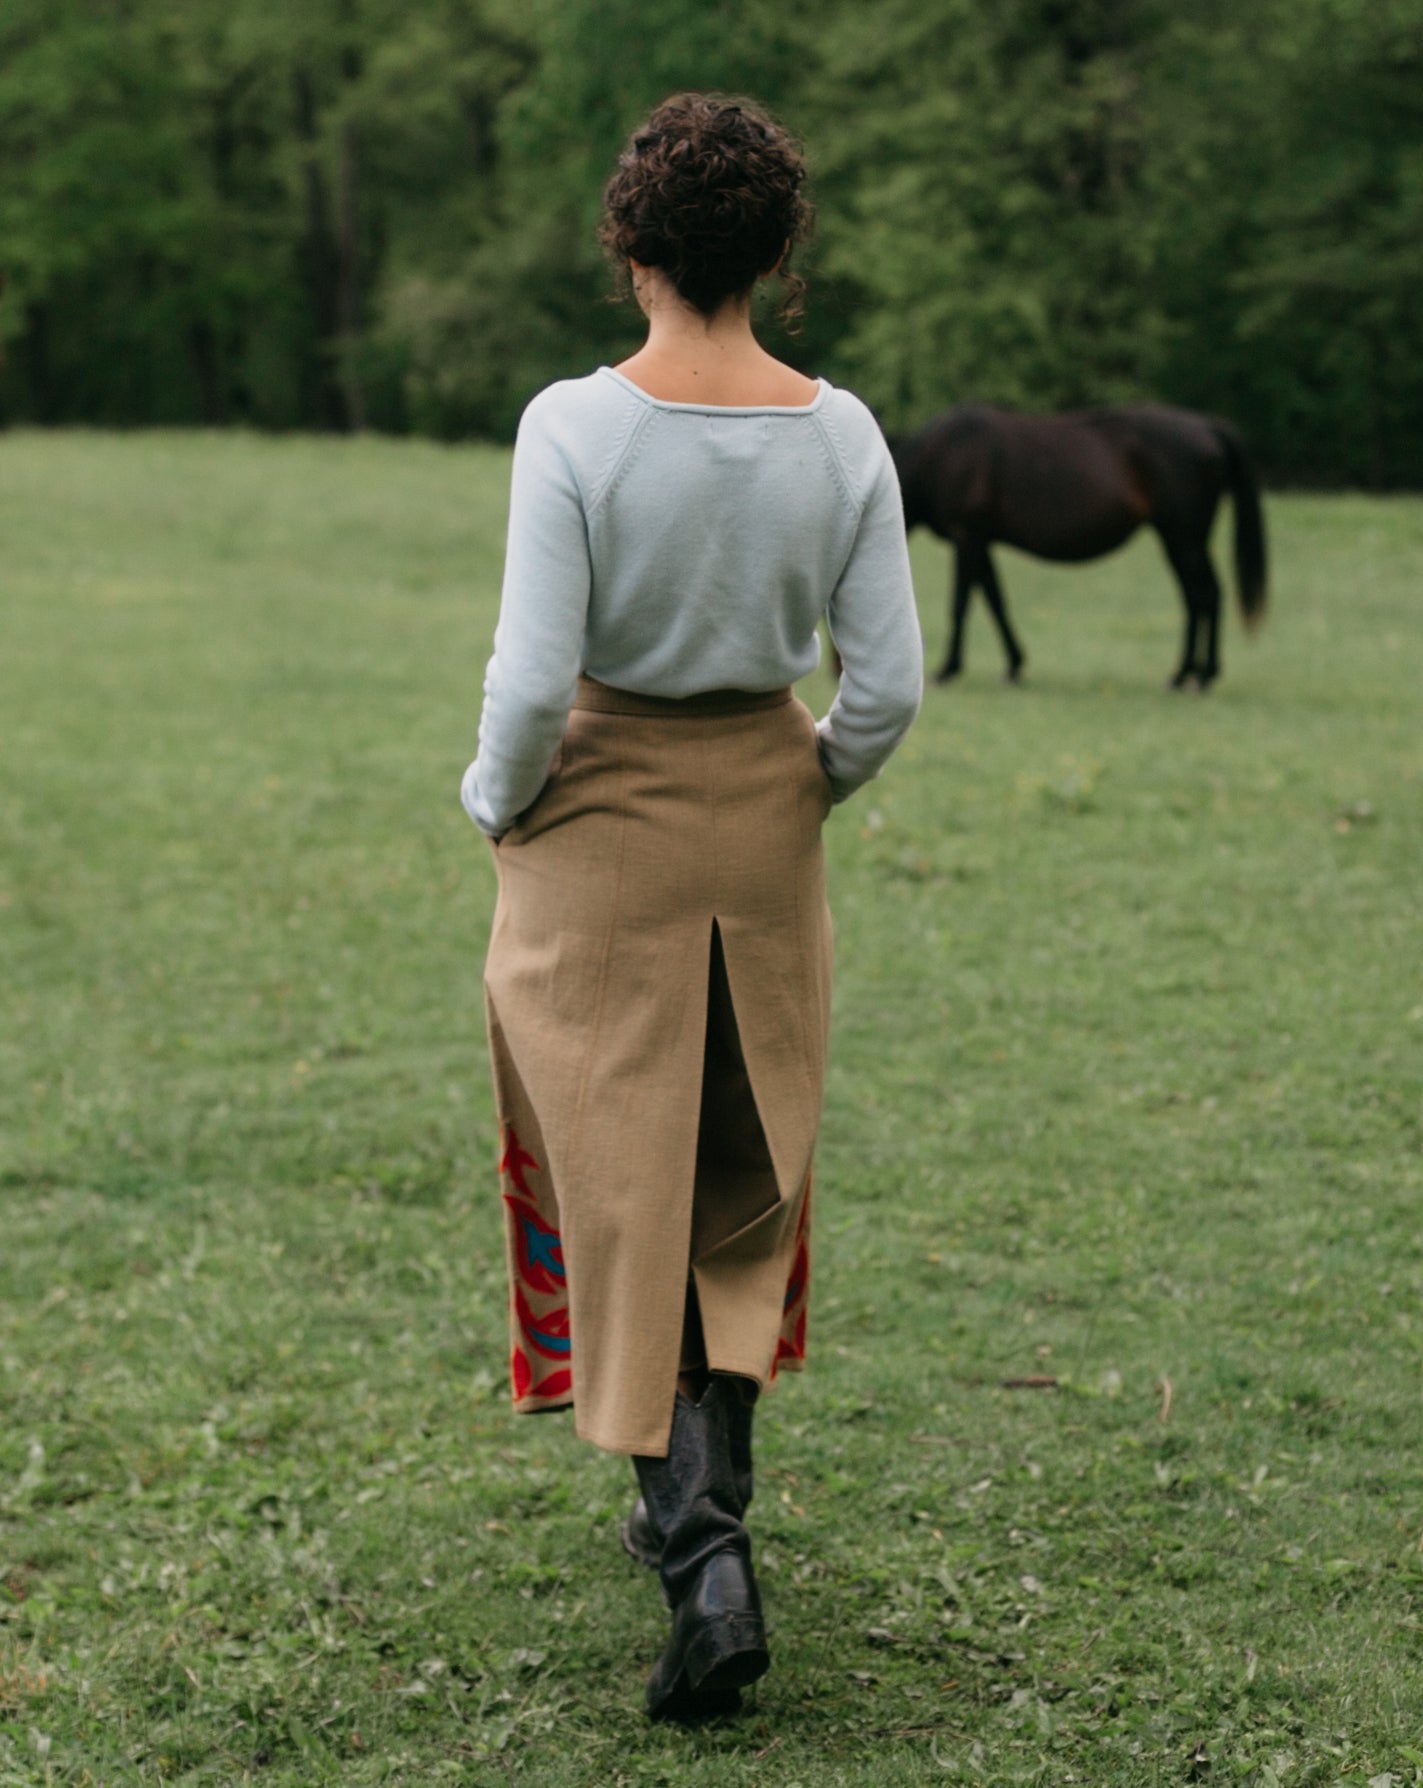 Back view of woman walking surrounded bu greenery with hands in the pocket of the culotte 231 Big Sky Riding Skirt, with a horse in the background.